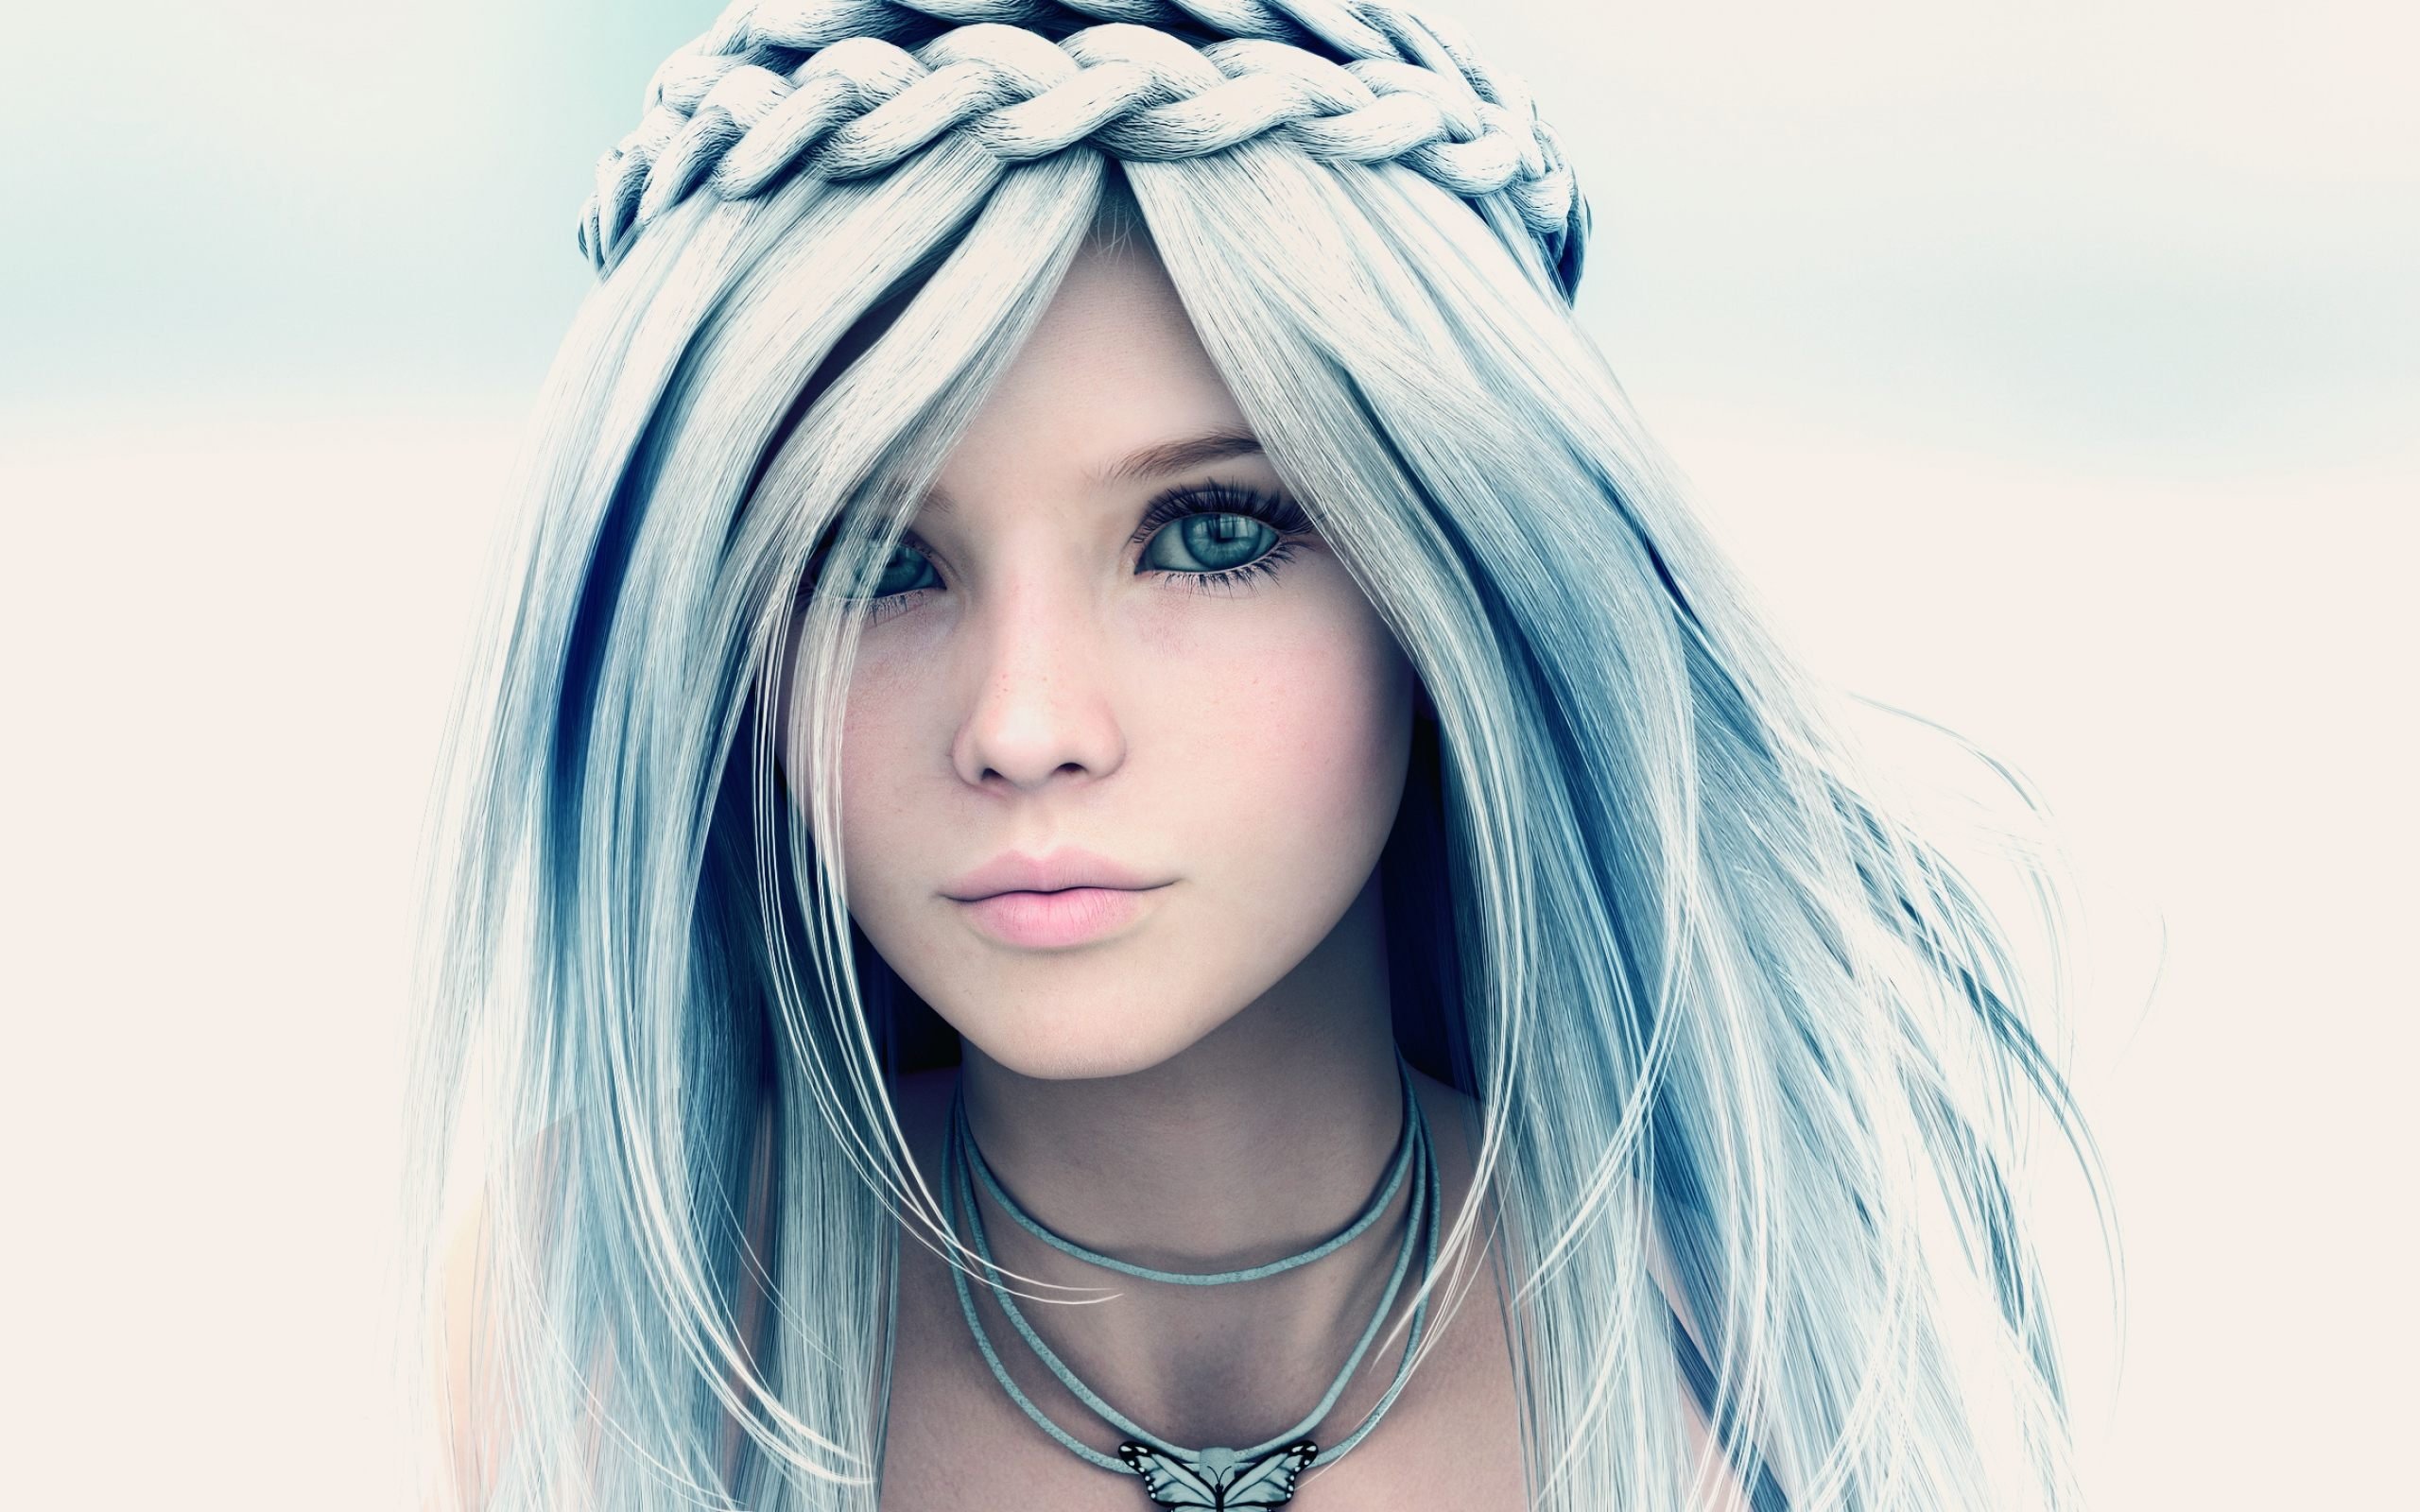 White Girl with Blue Hair Animation - wide 3